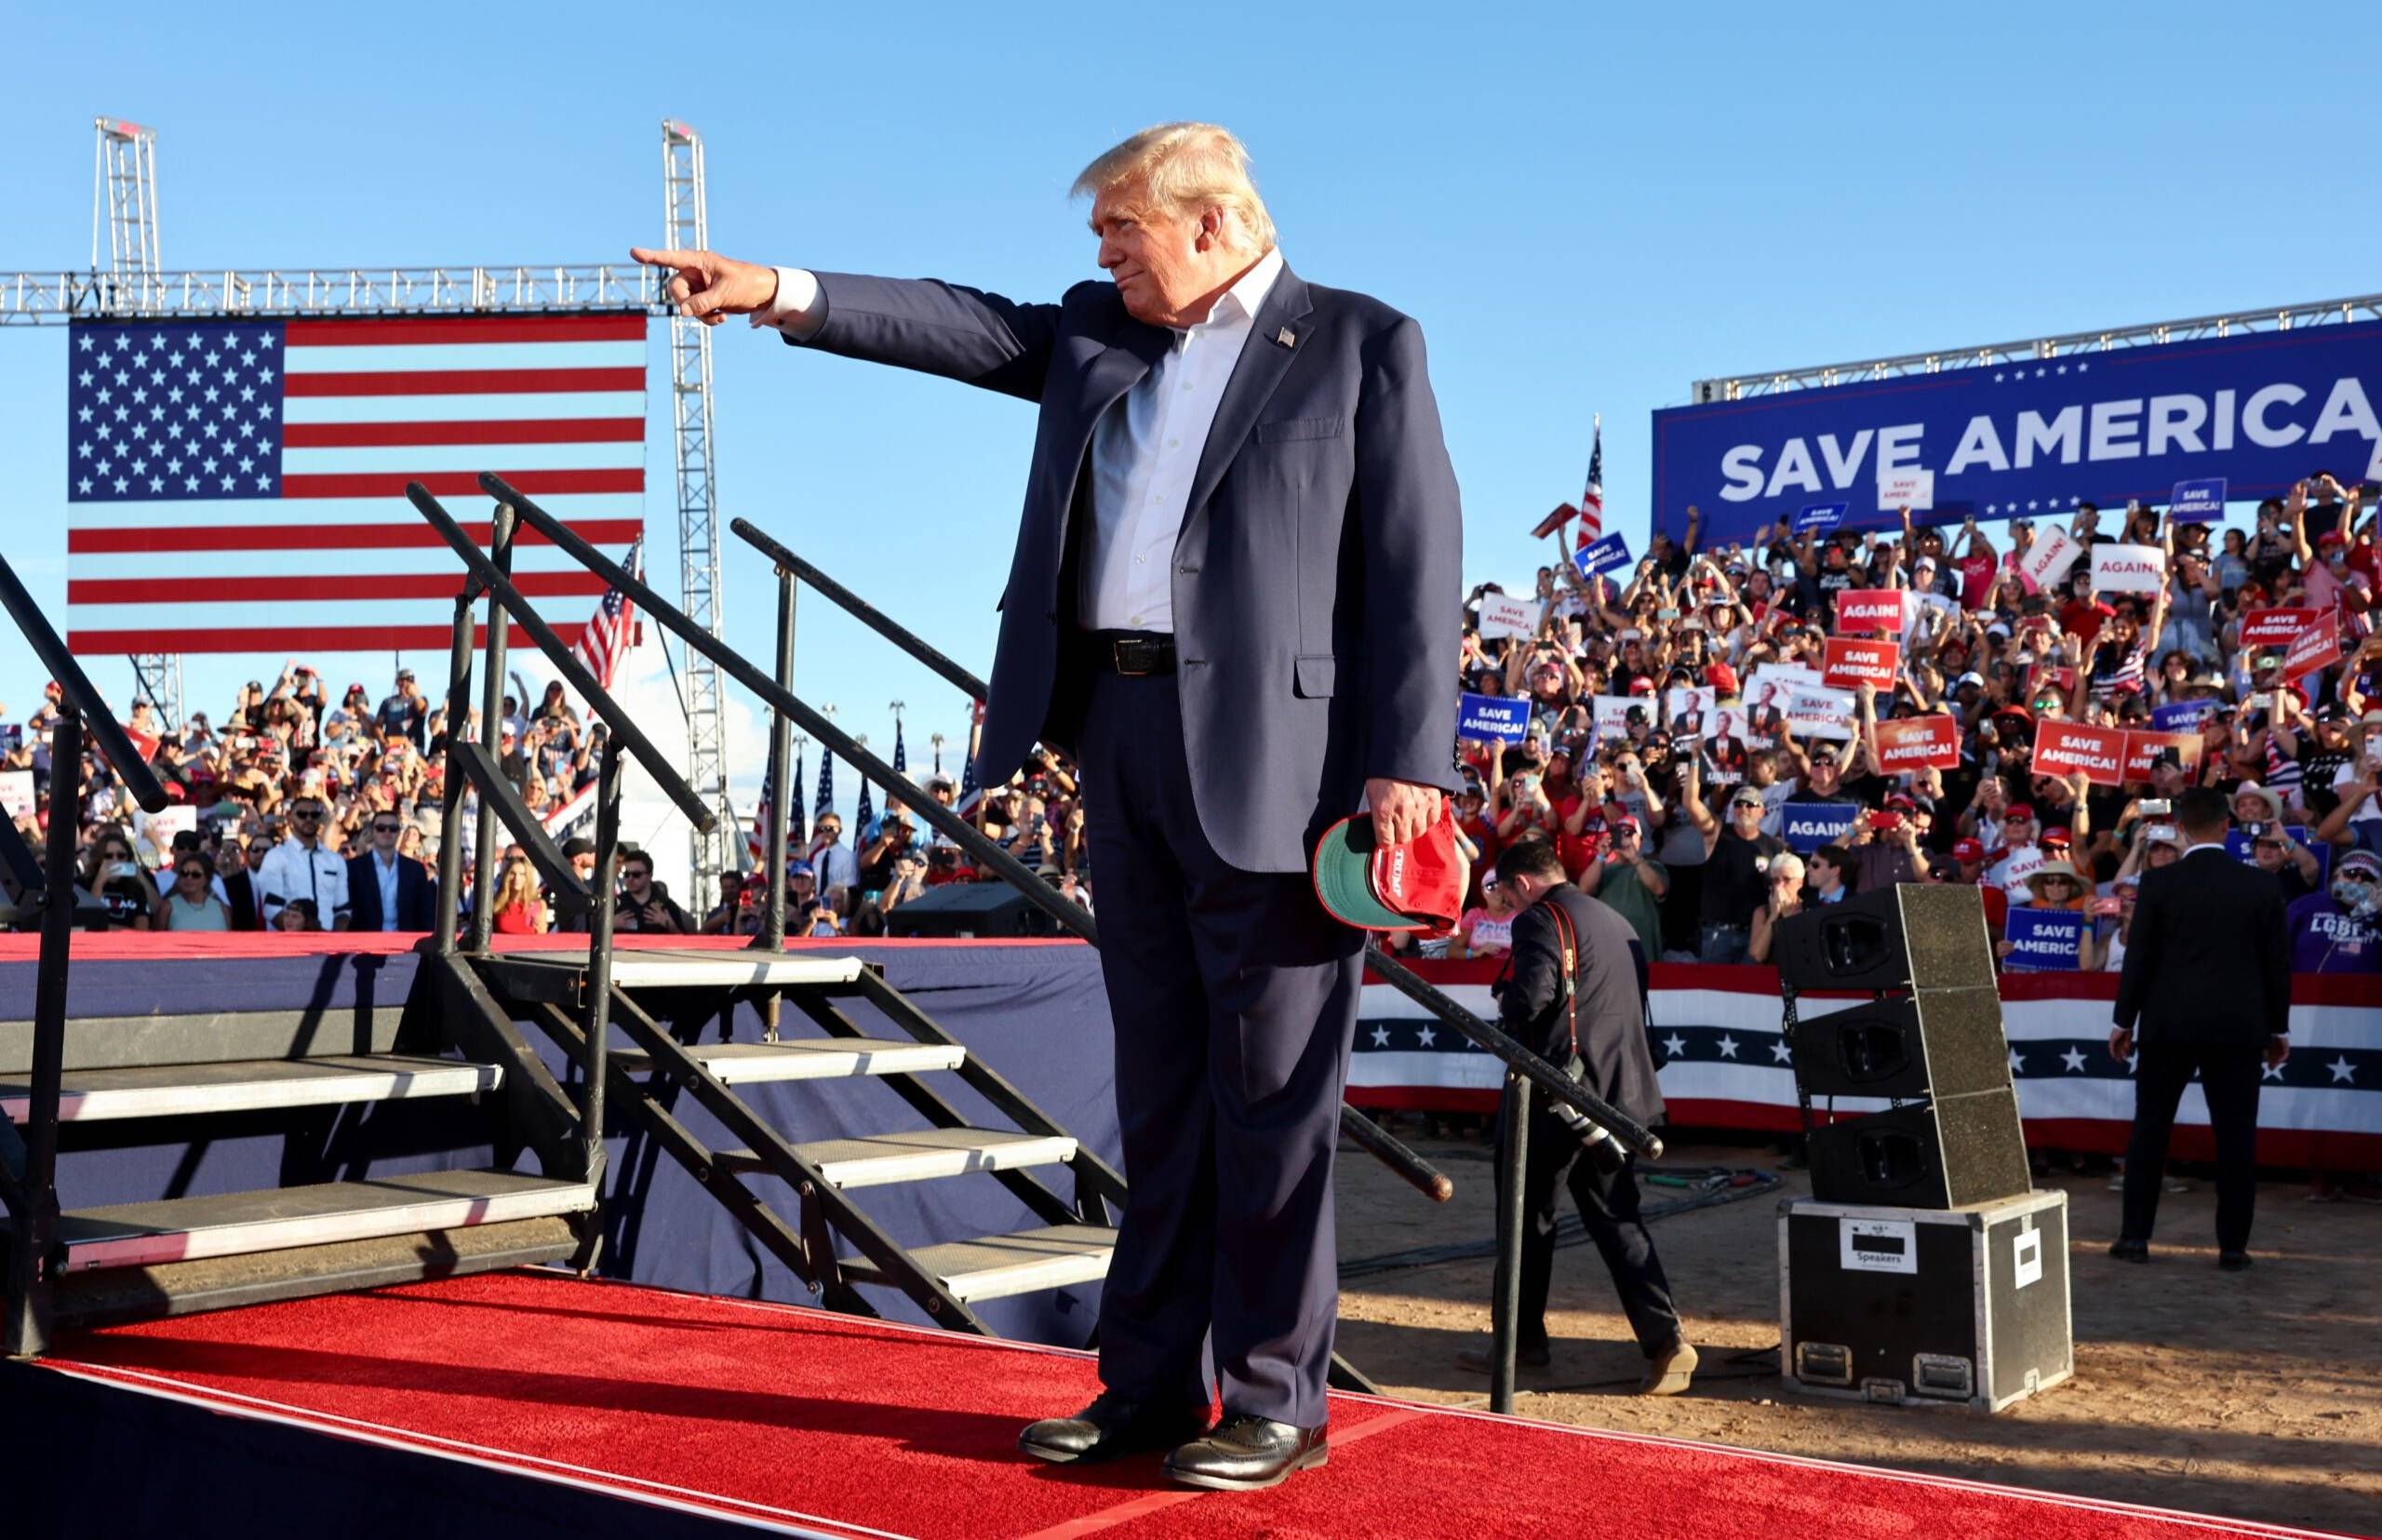 MESA, ARIZONA - OCTOBER 09: Former U.S. President Donald Trump gestures to the crowd as he arrives at the podium for a campaign rally at Legacy Sports USA on October 09, 2022 in Mesa, Arizona. Trump was stumping for Arizona GOP candidates, including gubernatorial nominee Kari Lake, ahead of the midterm election on November 8.   Mario Tama/Getty Images/AFP (Photo by MARIO TAMA / GETTY IMAGES NORTH AMERICA / Getty Images via AFP)